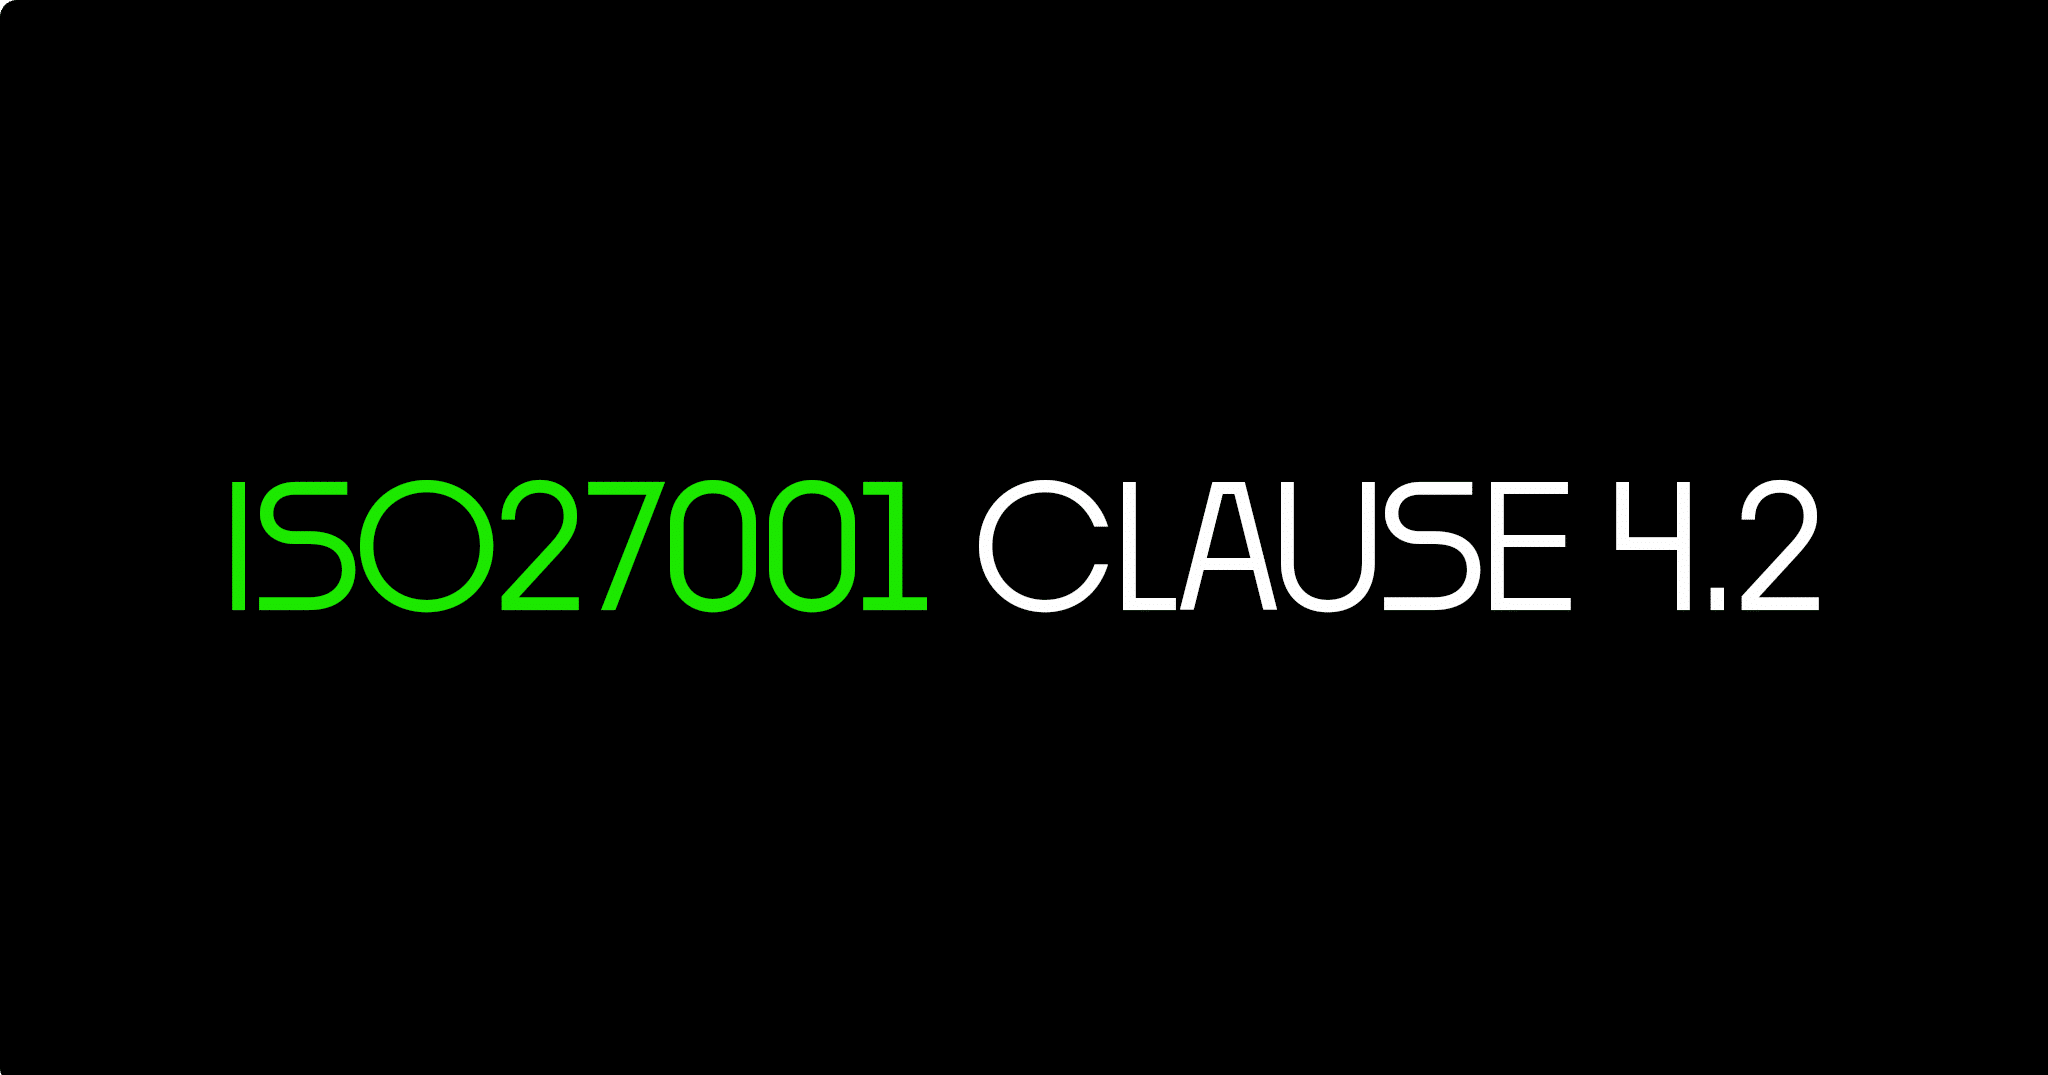 ISO 27001 Clause 4.2 Understanding The Needs And Expectations of Interested Parties  – Ultimate Certification Guide